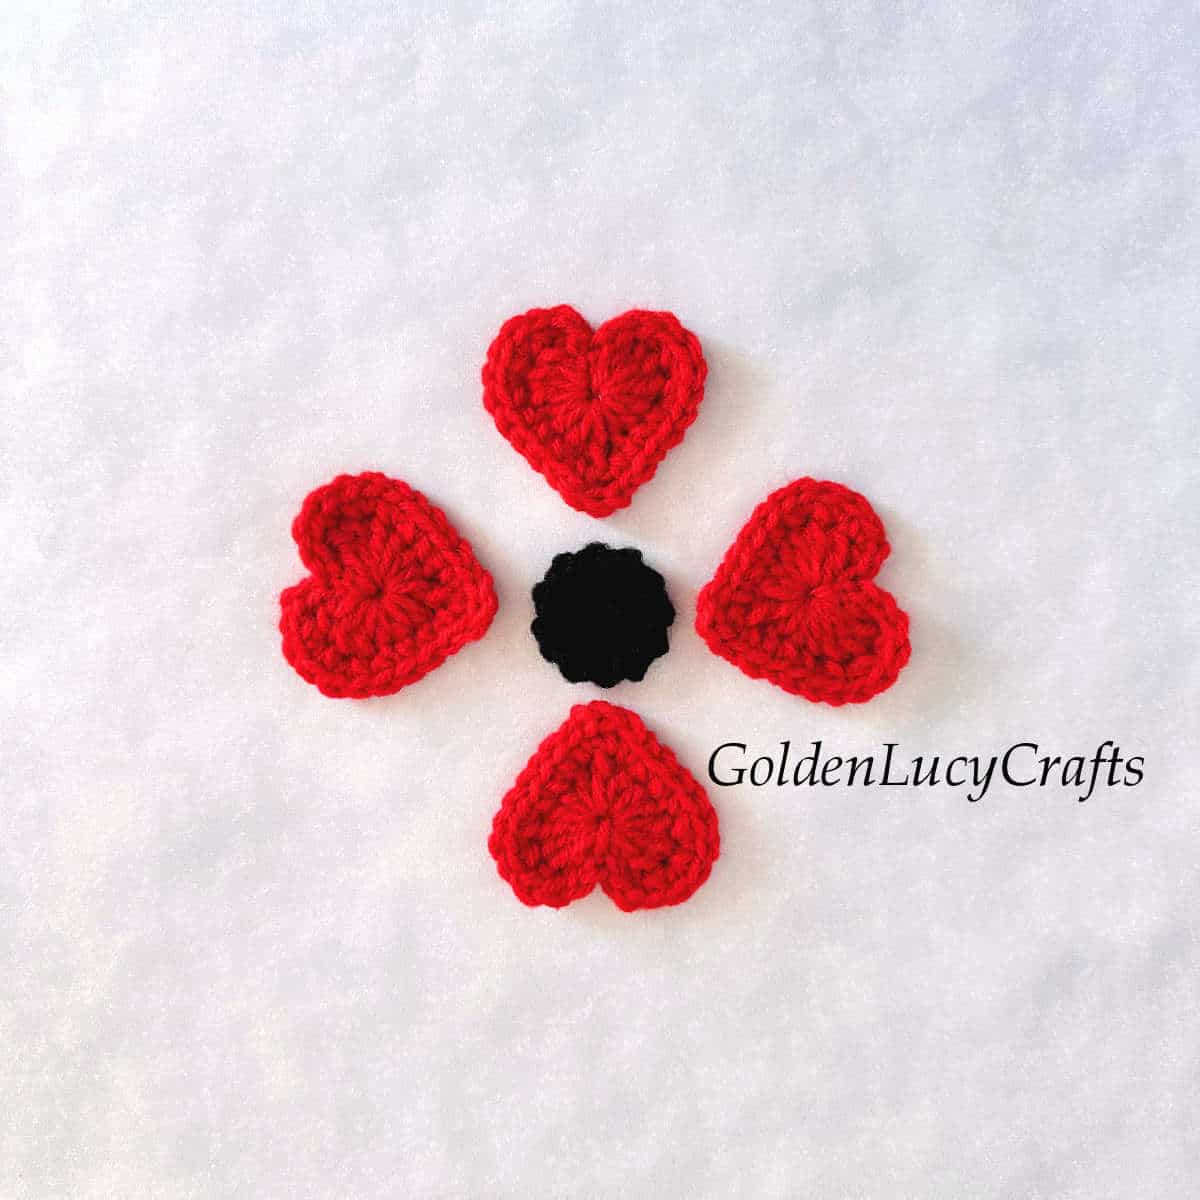 Elements of crochet poppy flower - four red heart and one black circle.